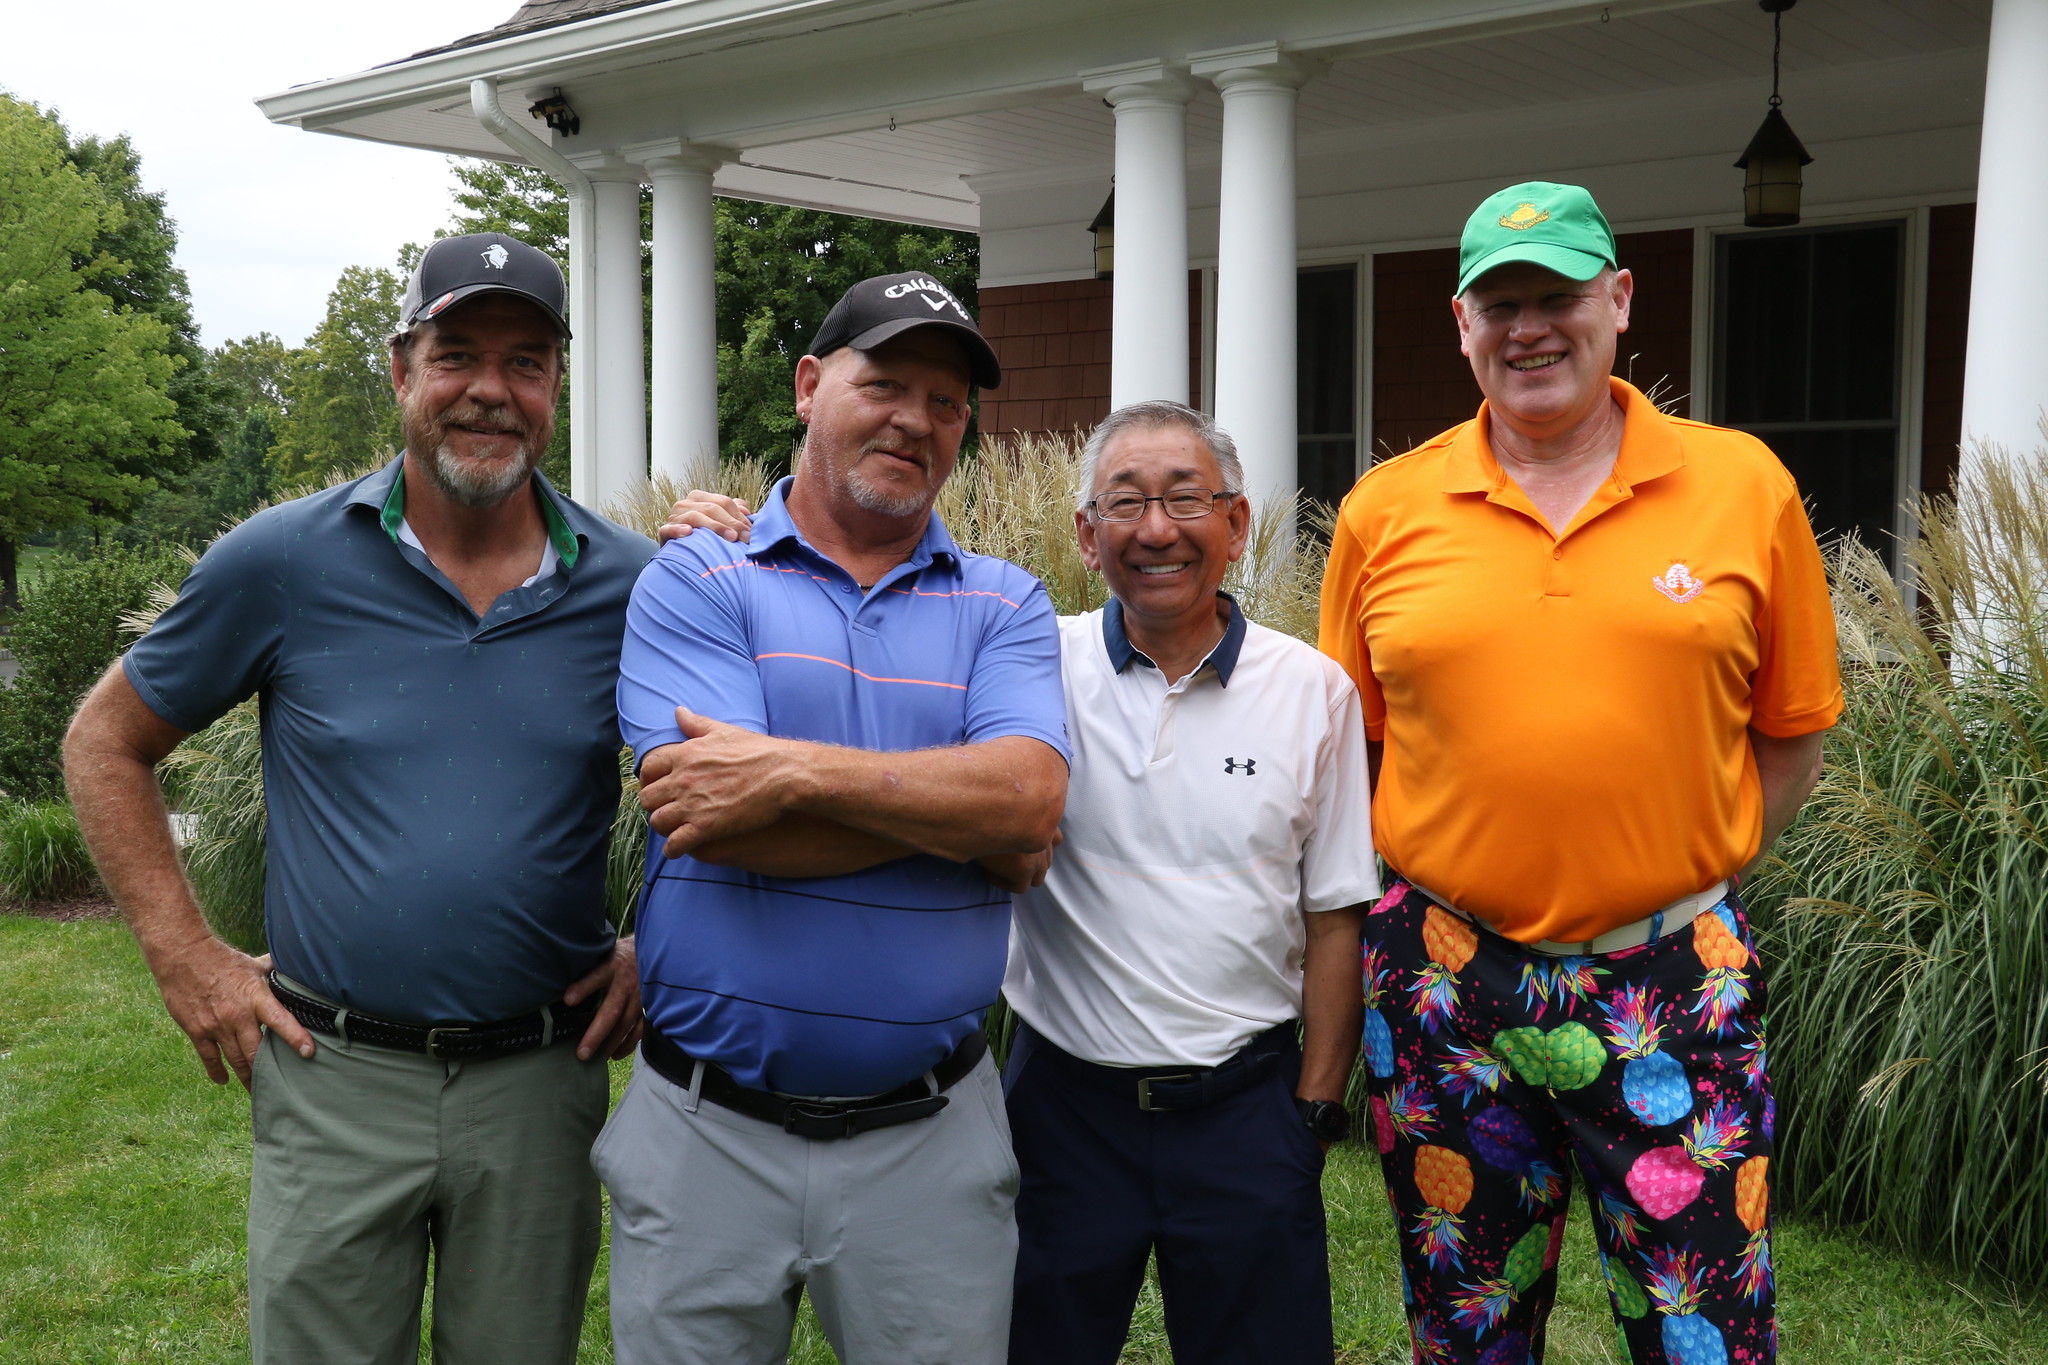 Four men in golf attire stand outside the club house at Hollow Brook Golf Club during the Community Based Services' charity golf event.